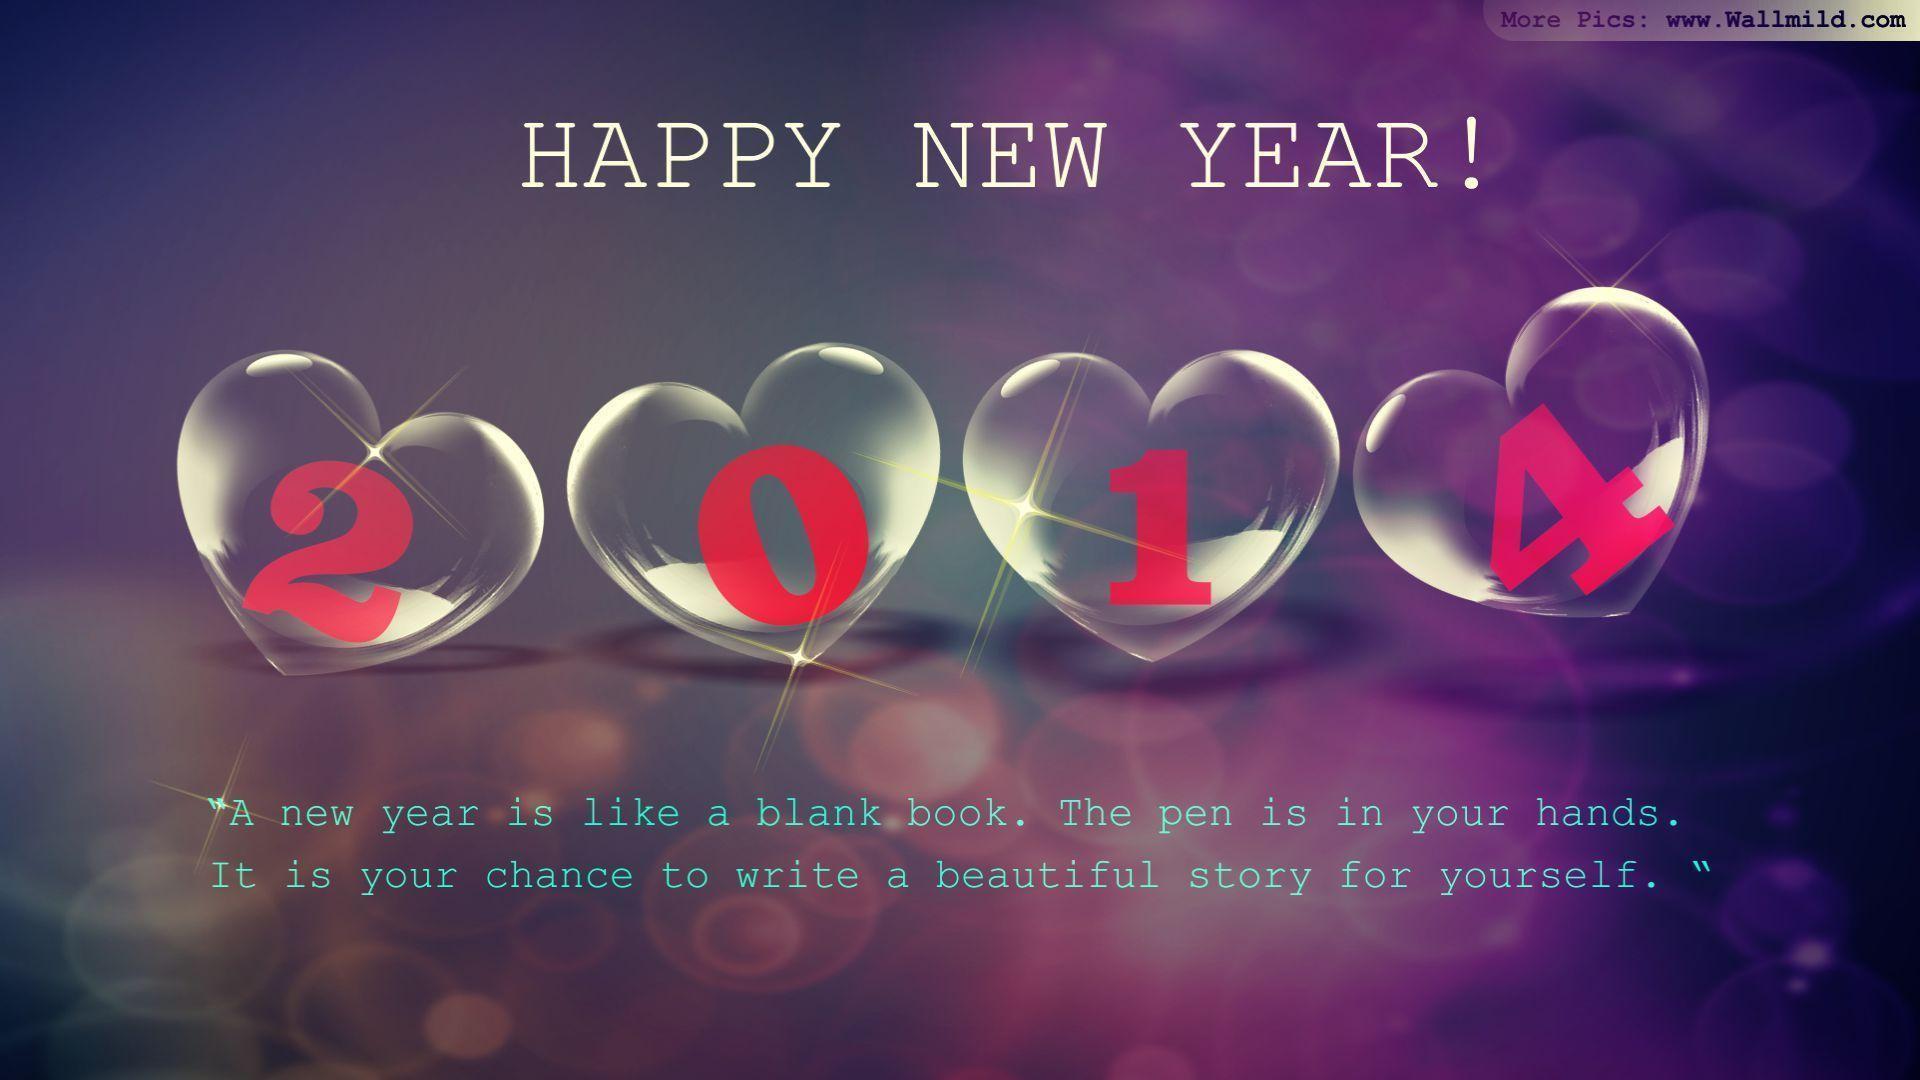 Happy new year wallpaper free download